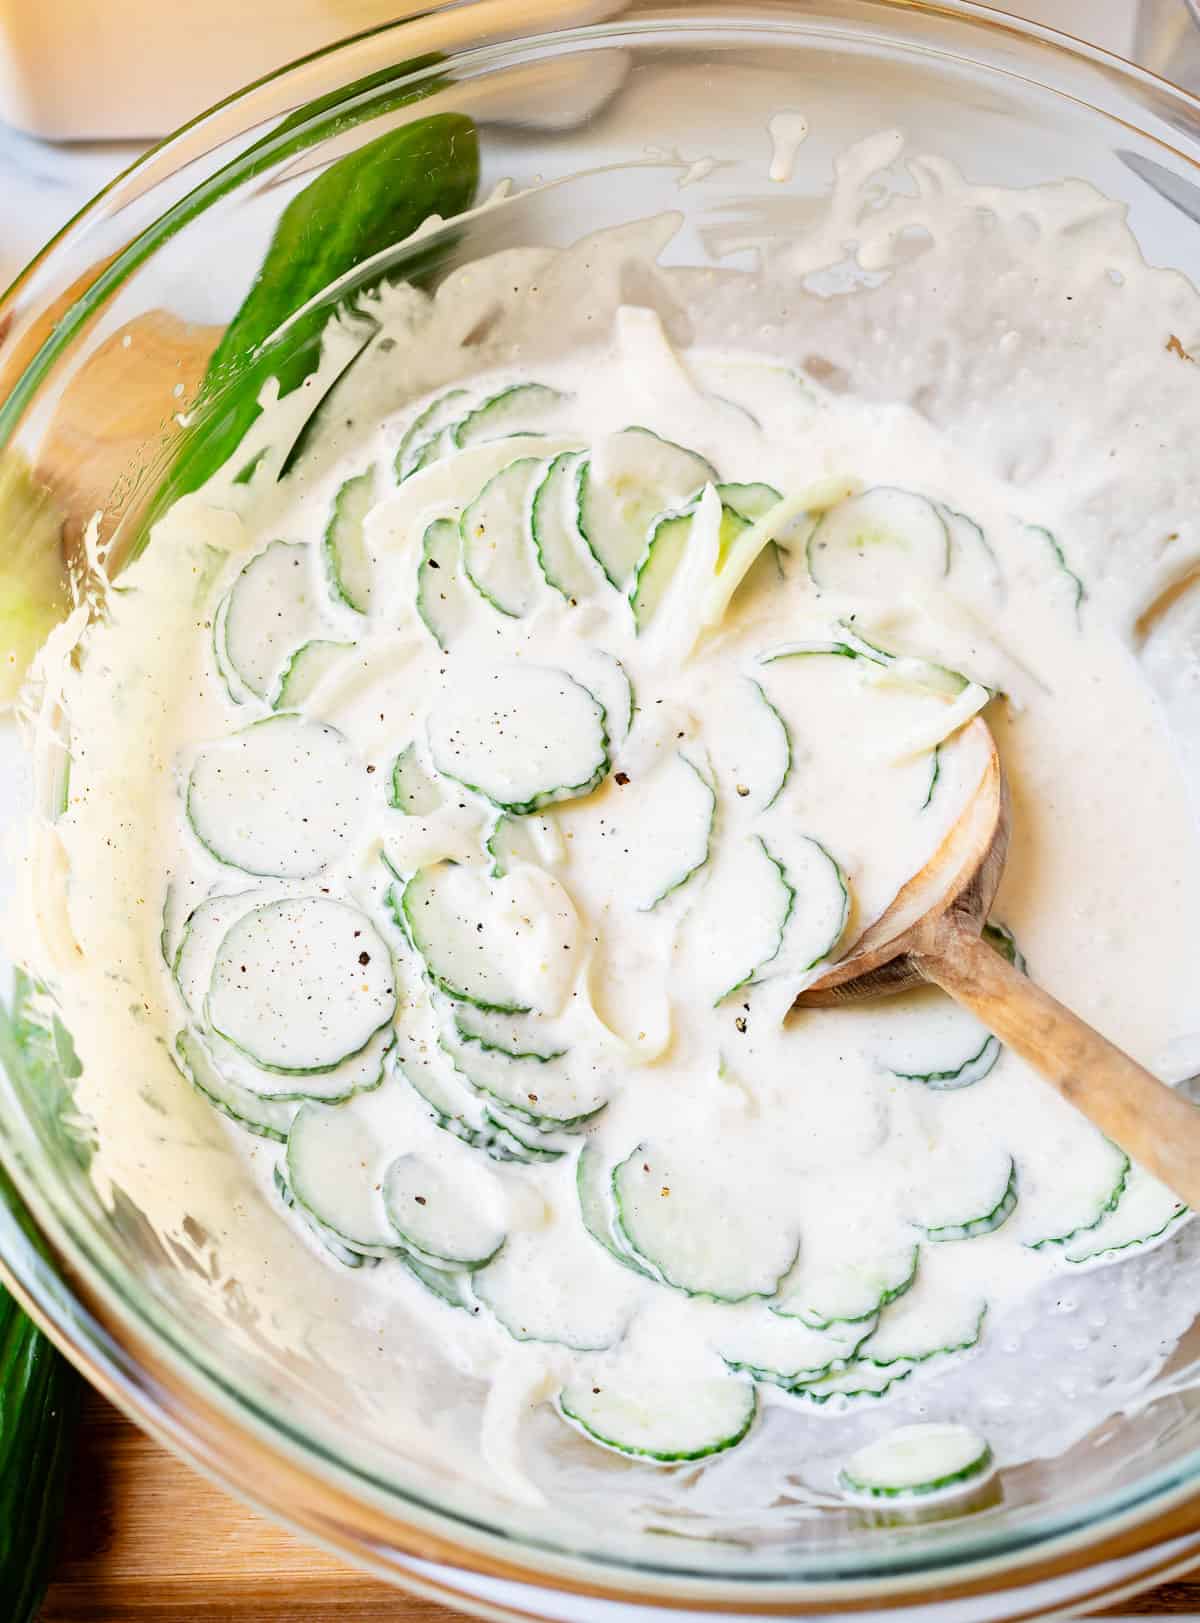 Mixing creamy cucumber salad in large clear glass bowl with a wooden spoon.